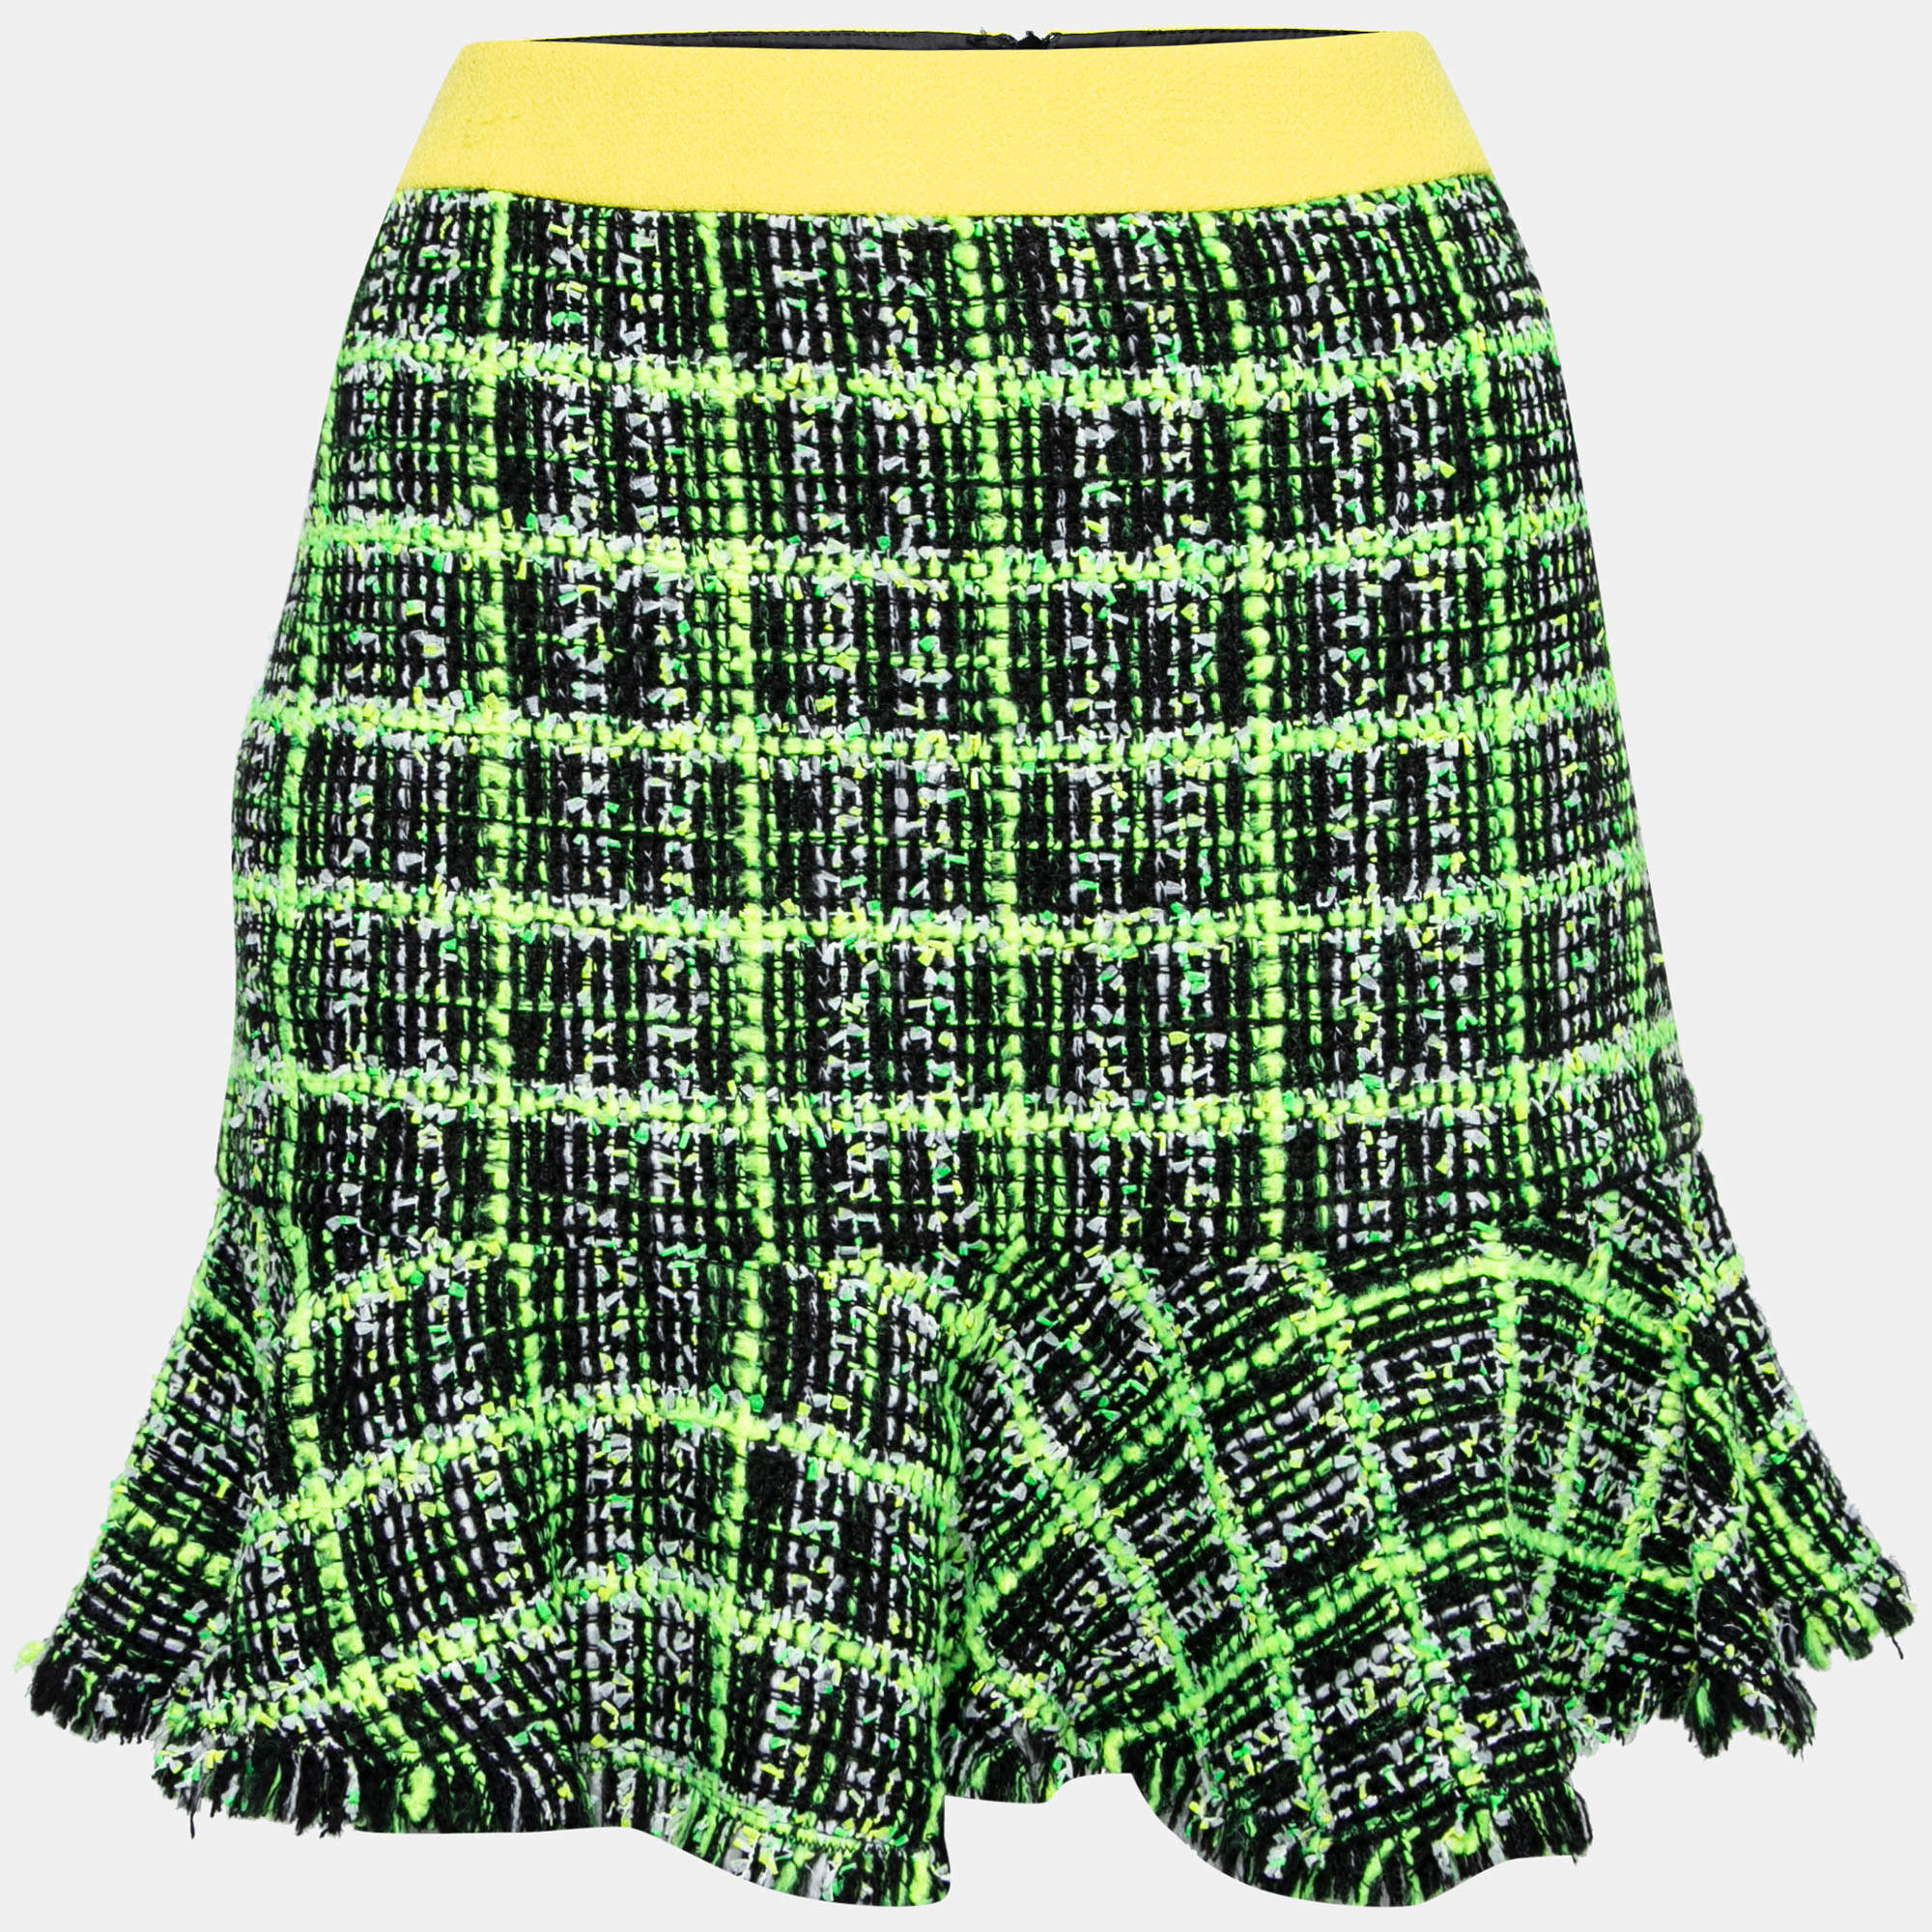 Moschino Cheap and Chic Textured Knit Multicolored Checkered Skirt M 